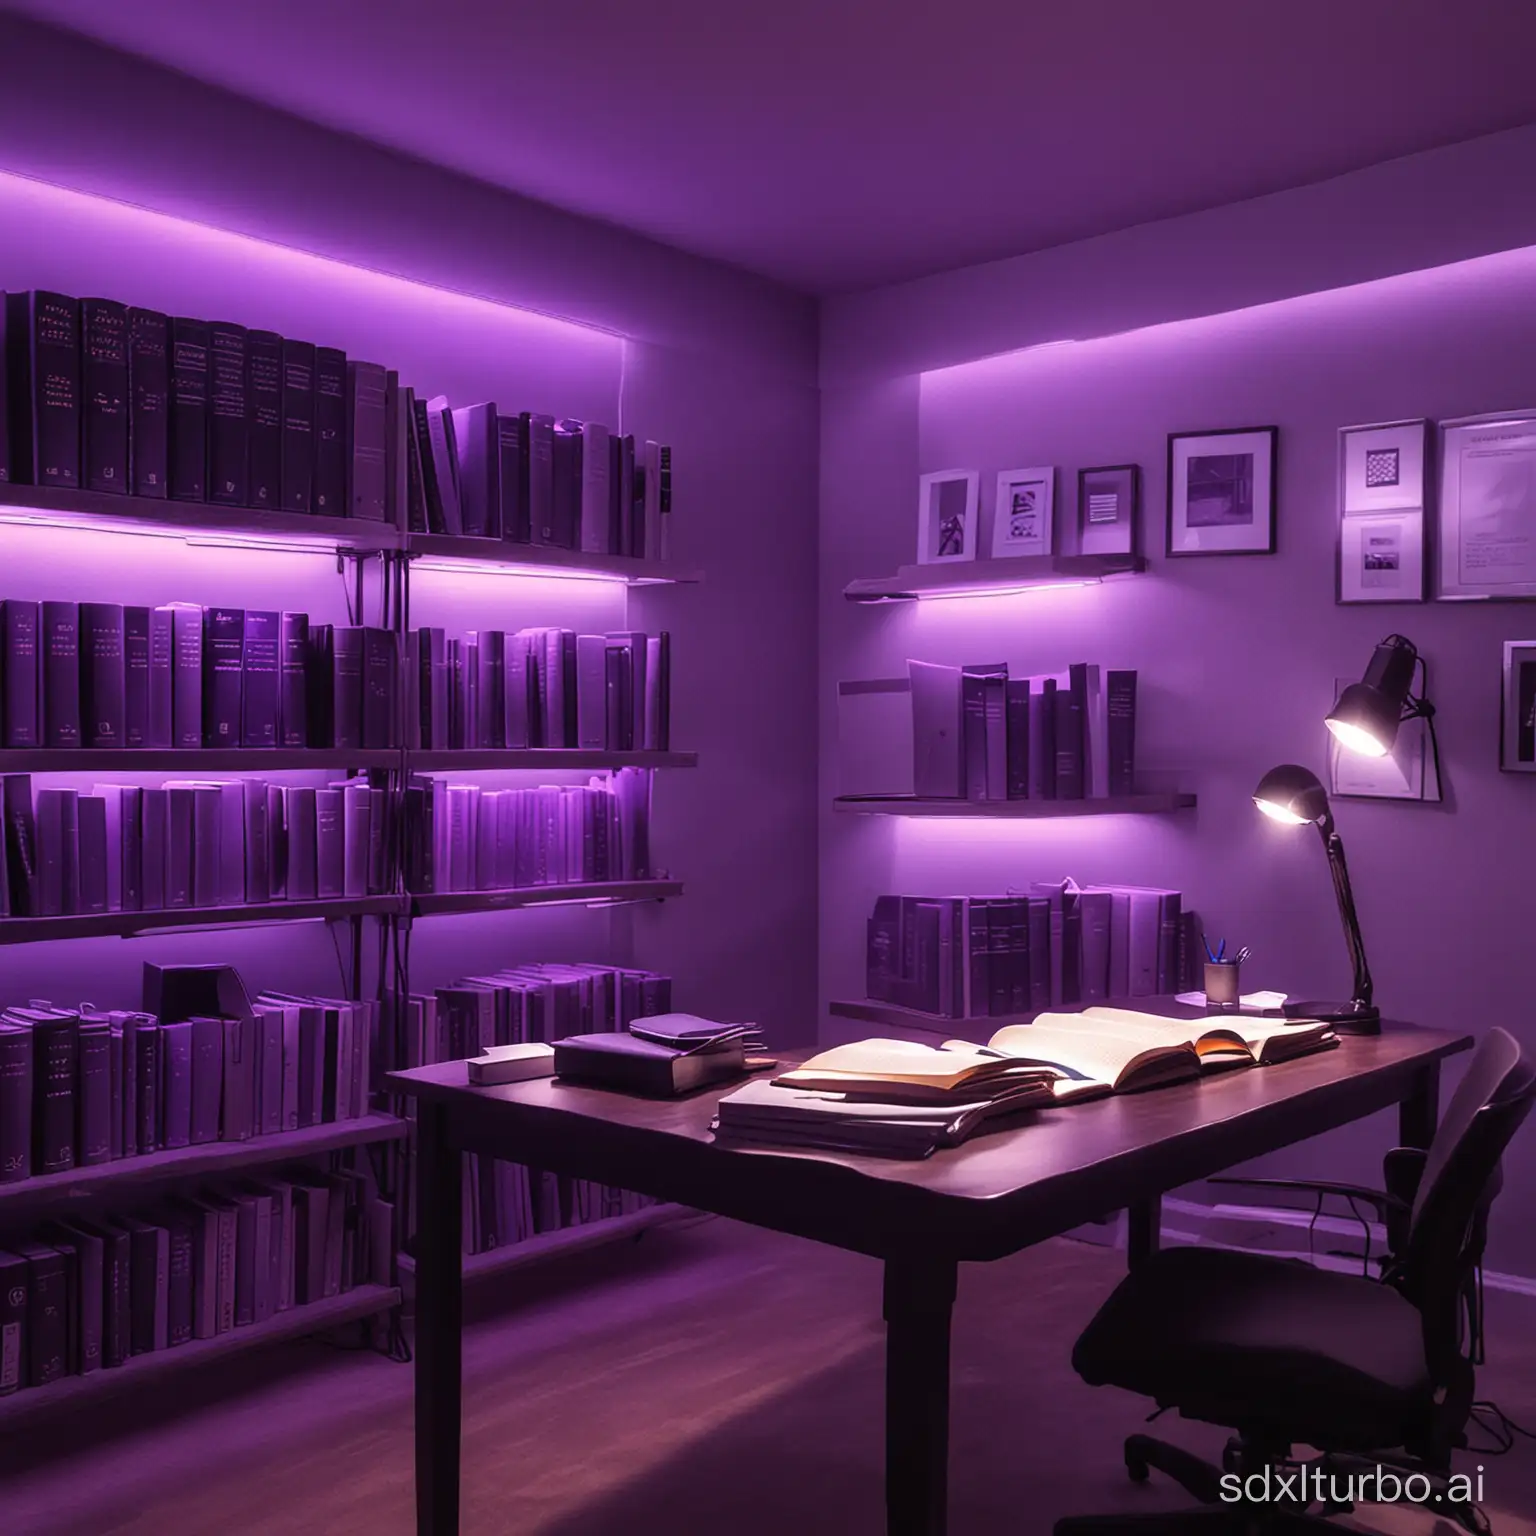 create an office background with books and cool purple lighting